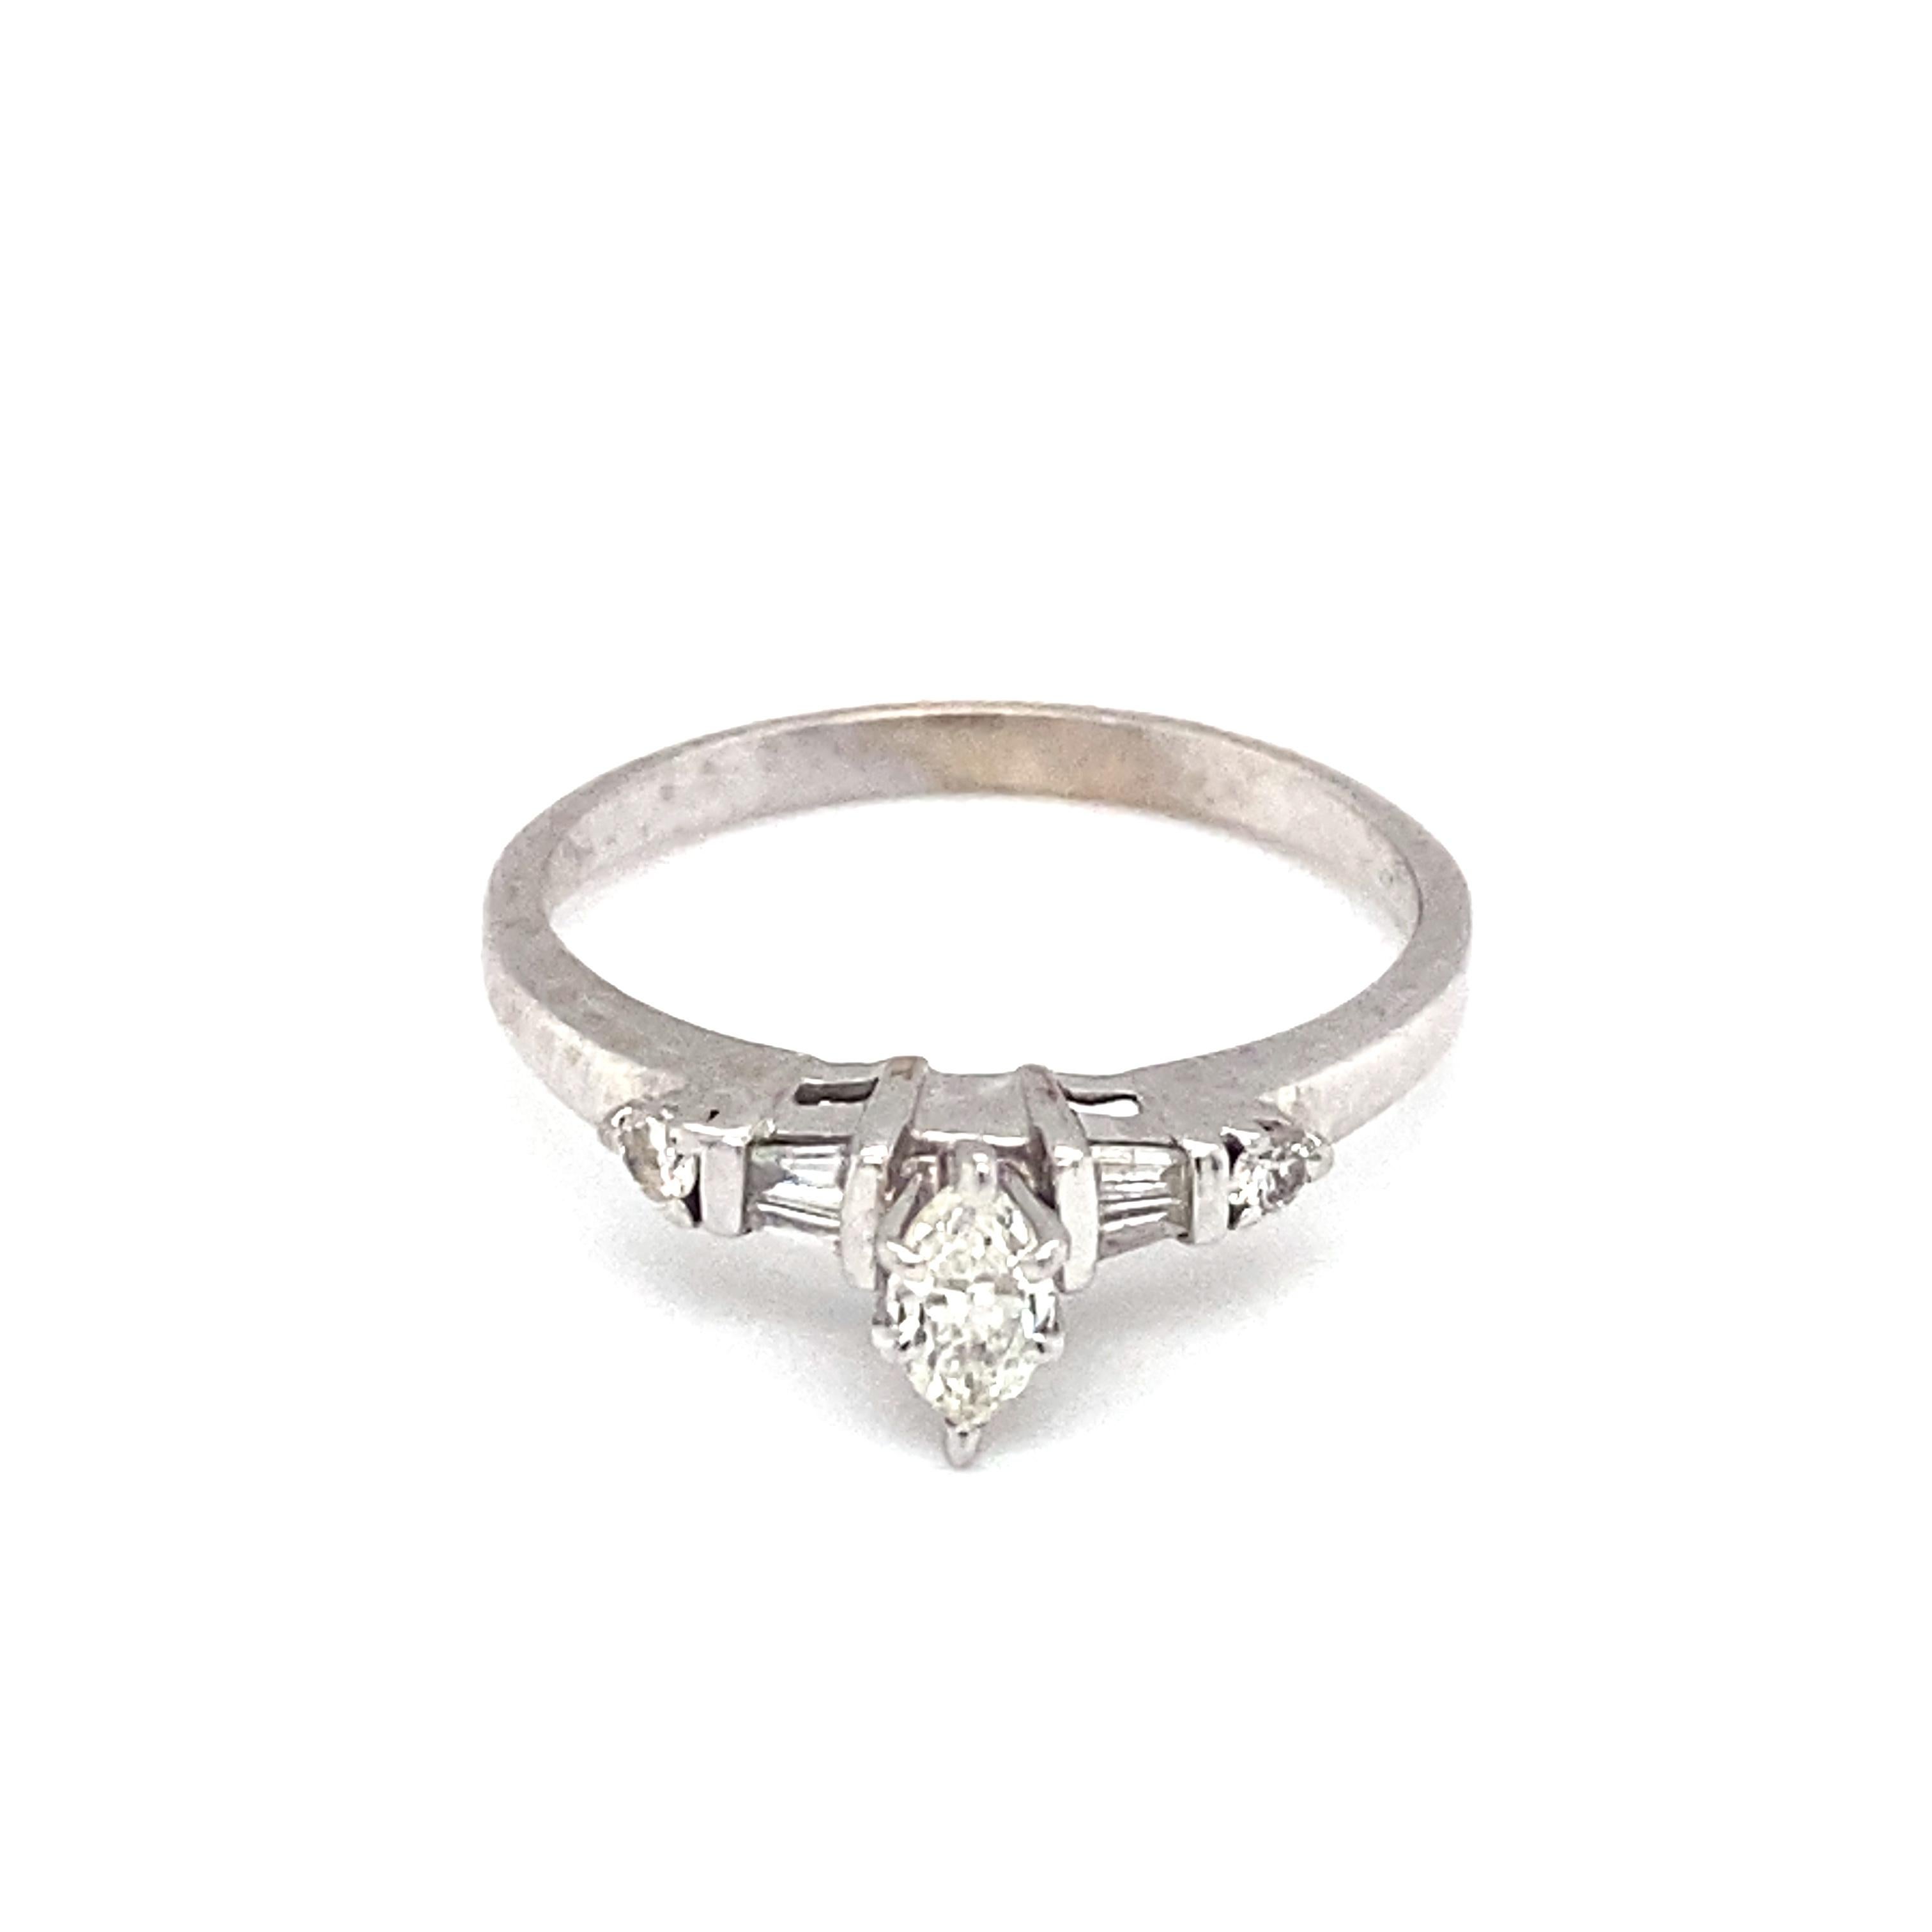 
Item Details: This marquise diamond engagement ring is a beautiful vintage piece that is perfect for a new bride!

Circa: 1950s
Metal Type: 14k white gold
Weight: 2.5g
Size: US 8.25, resizable

Diamond Details:

Carat: 0.25ct center
Shape: